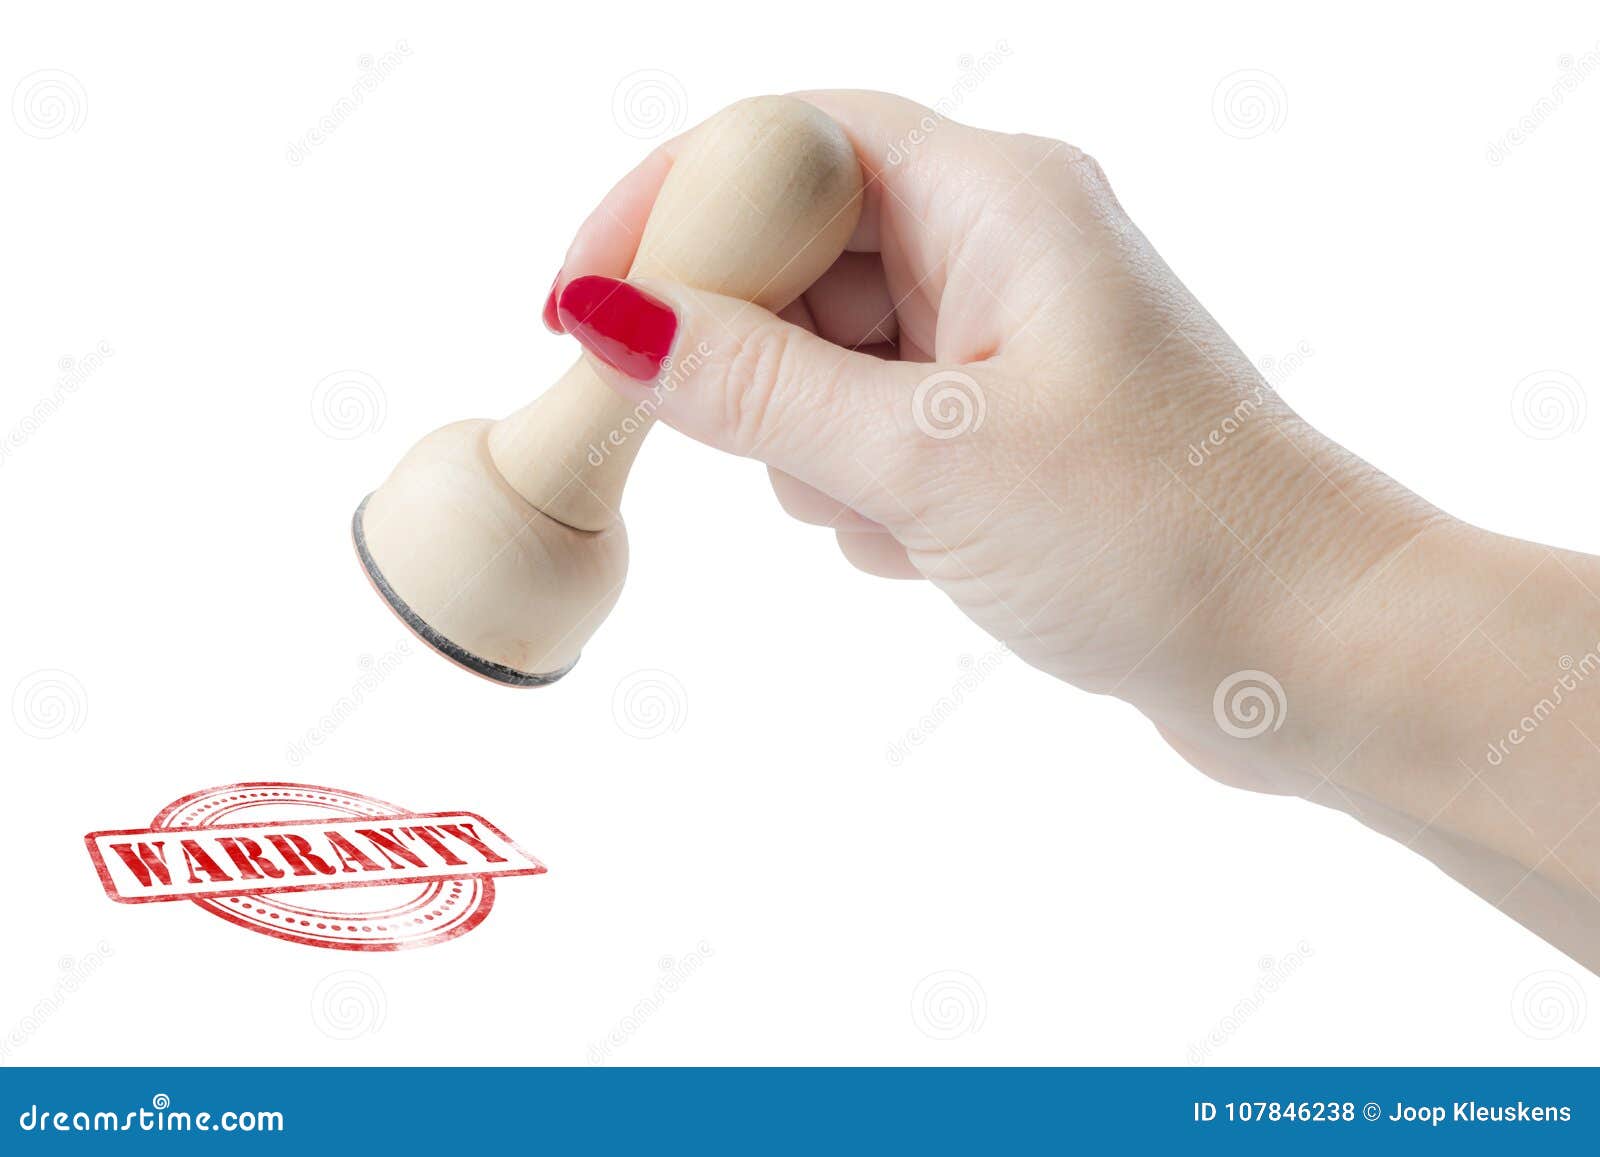 hand holding a rubber stamp with the word warranty